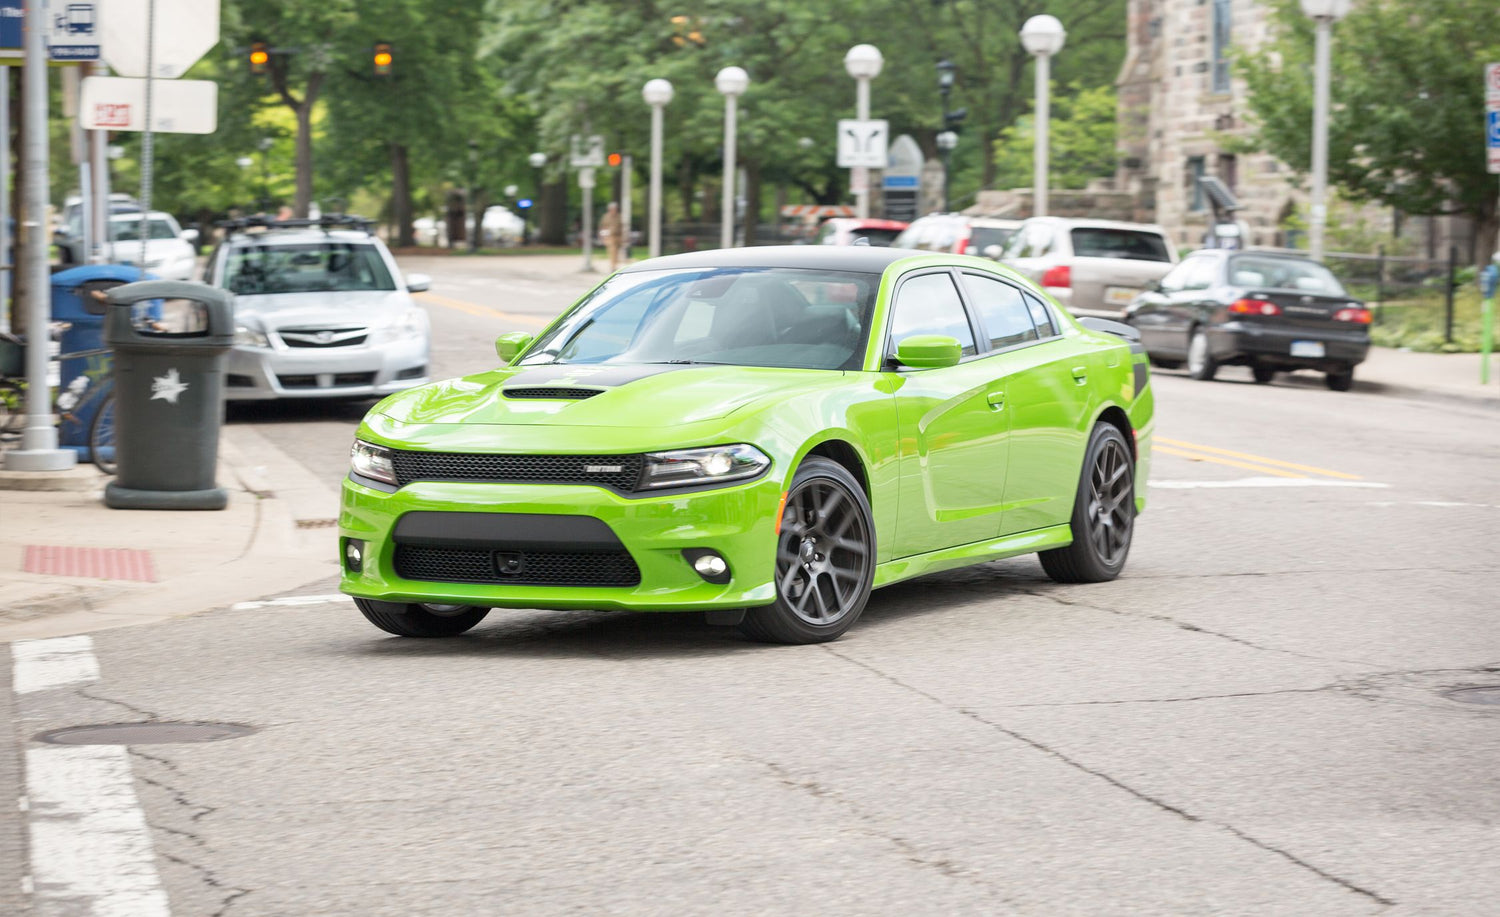 "Power Packs" - Dodge Charger/Challenger R/T 5.7L